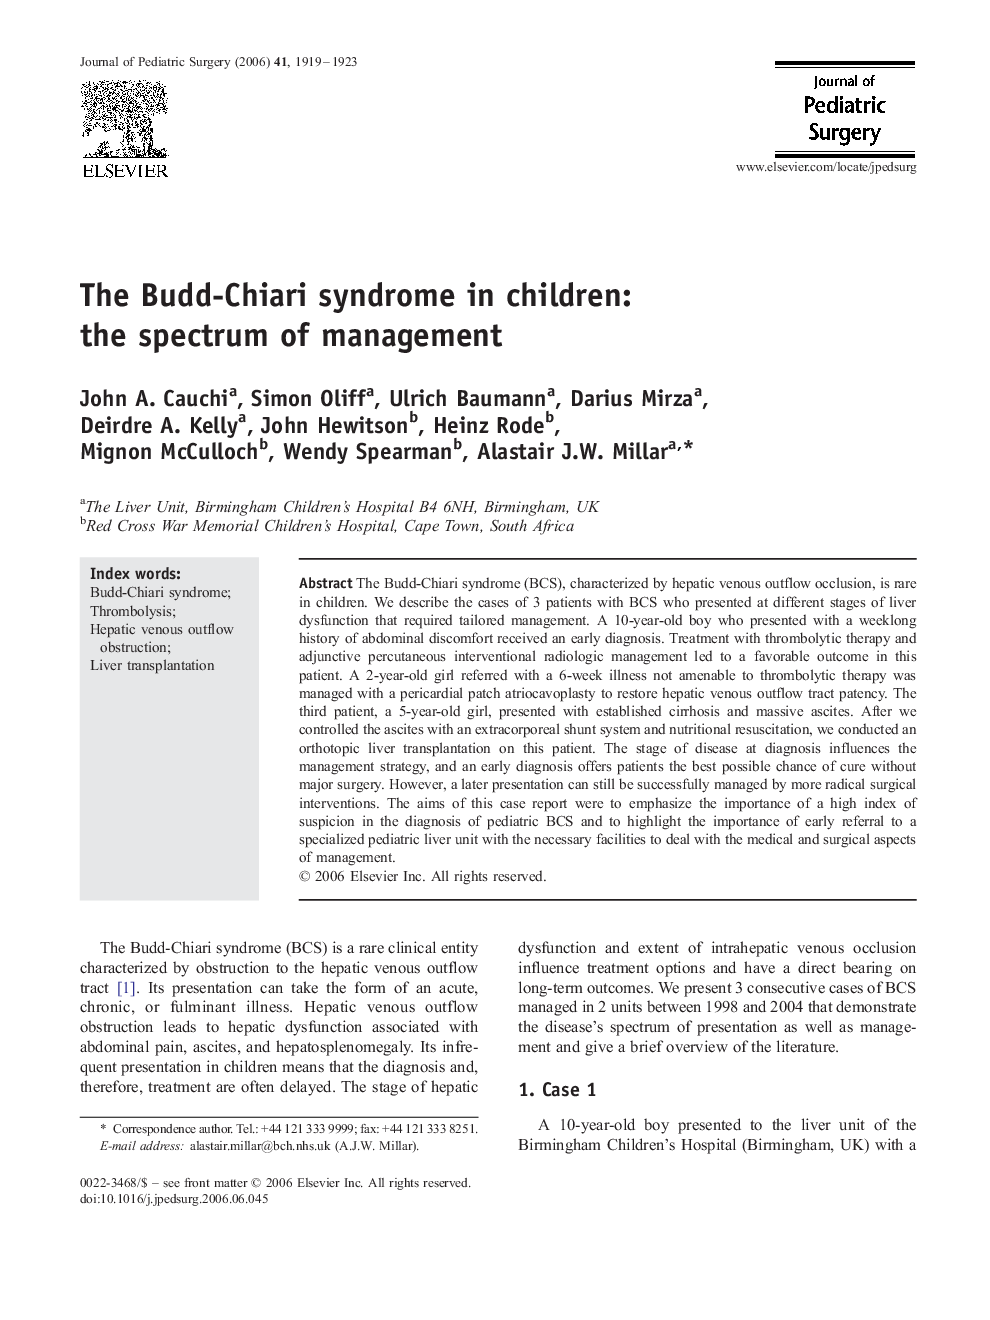 The Budd-Chiari syndrome in children: the spectrum of management